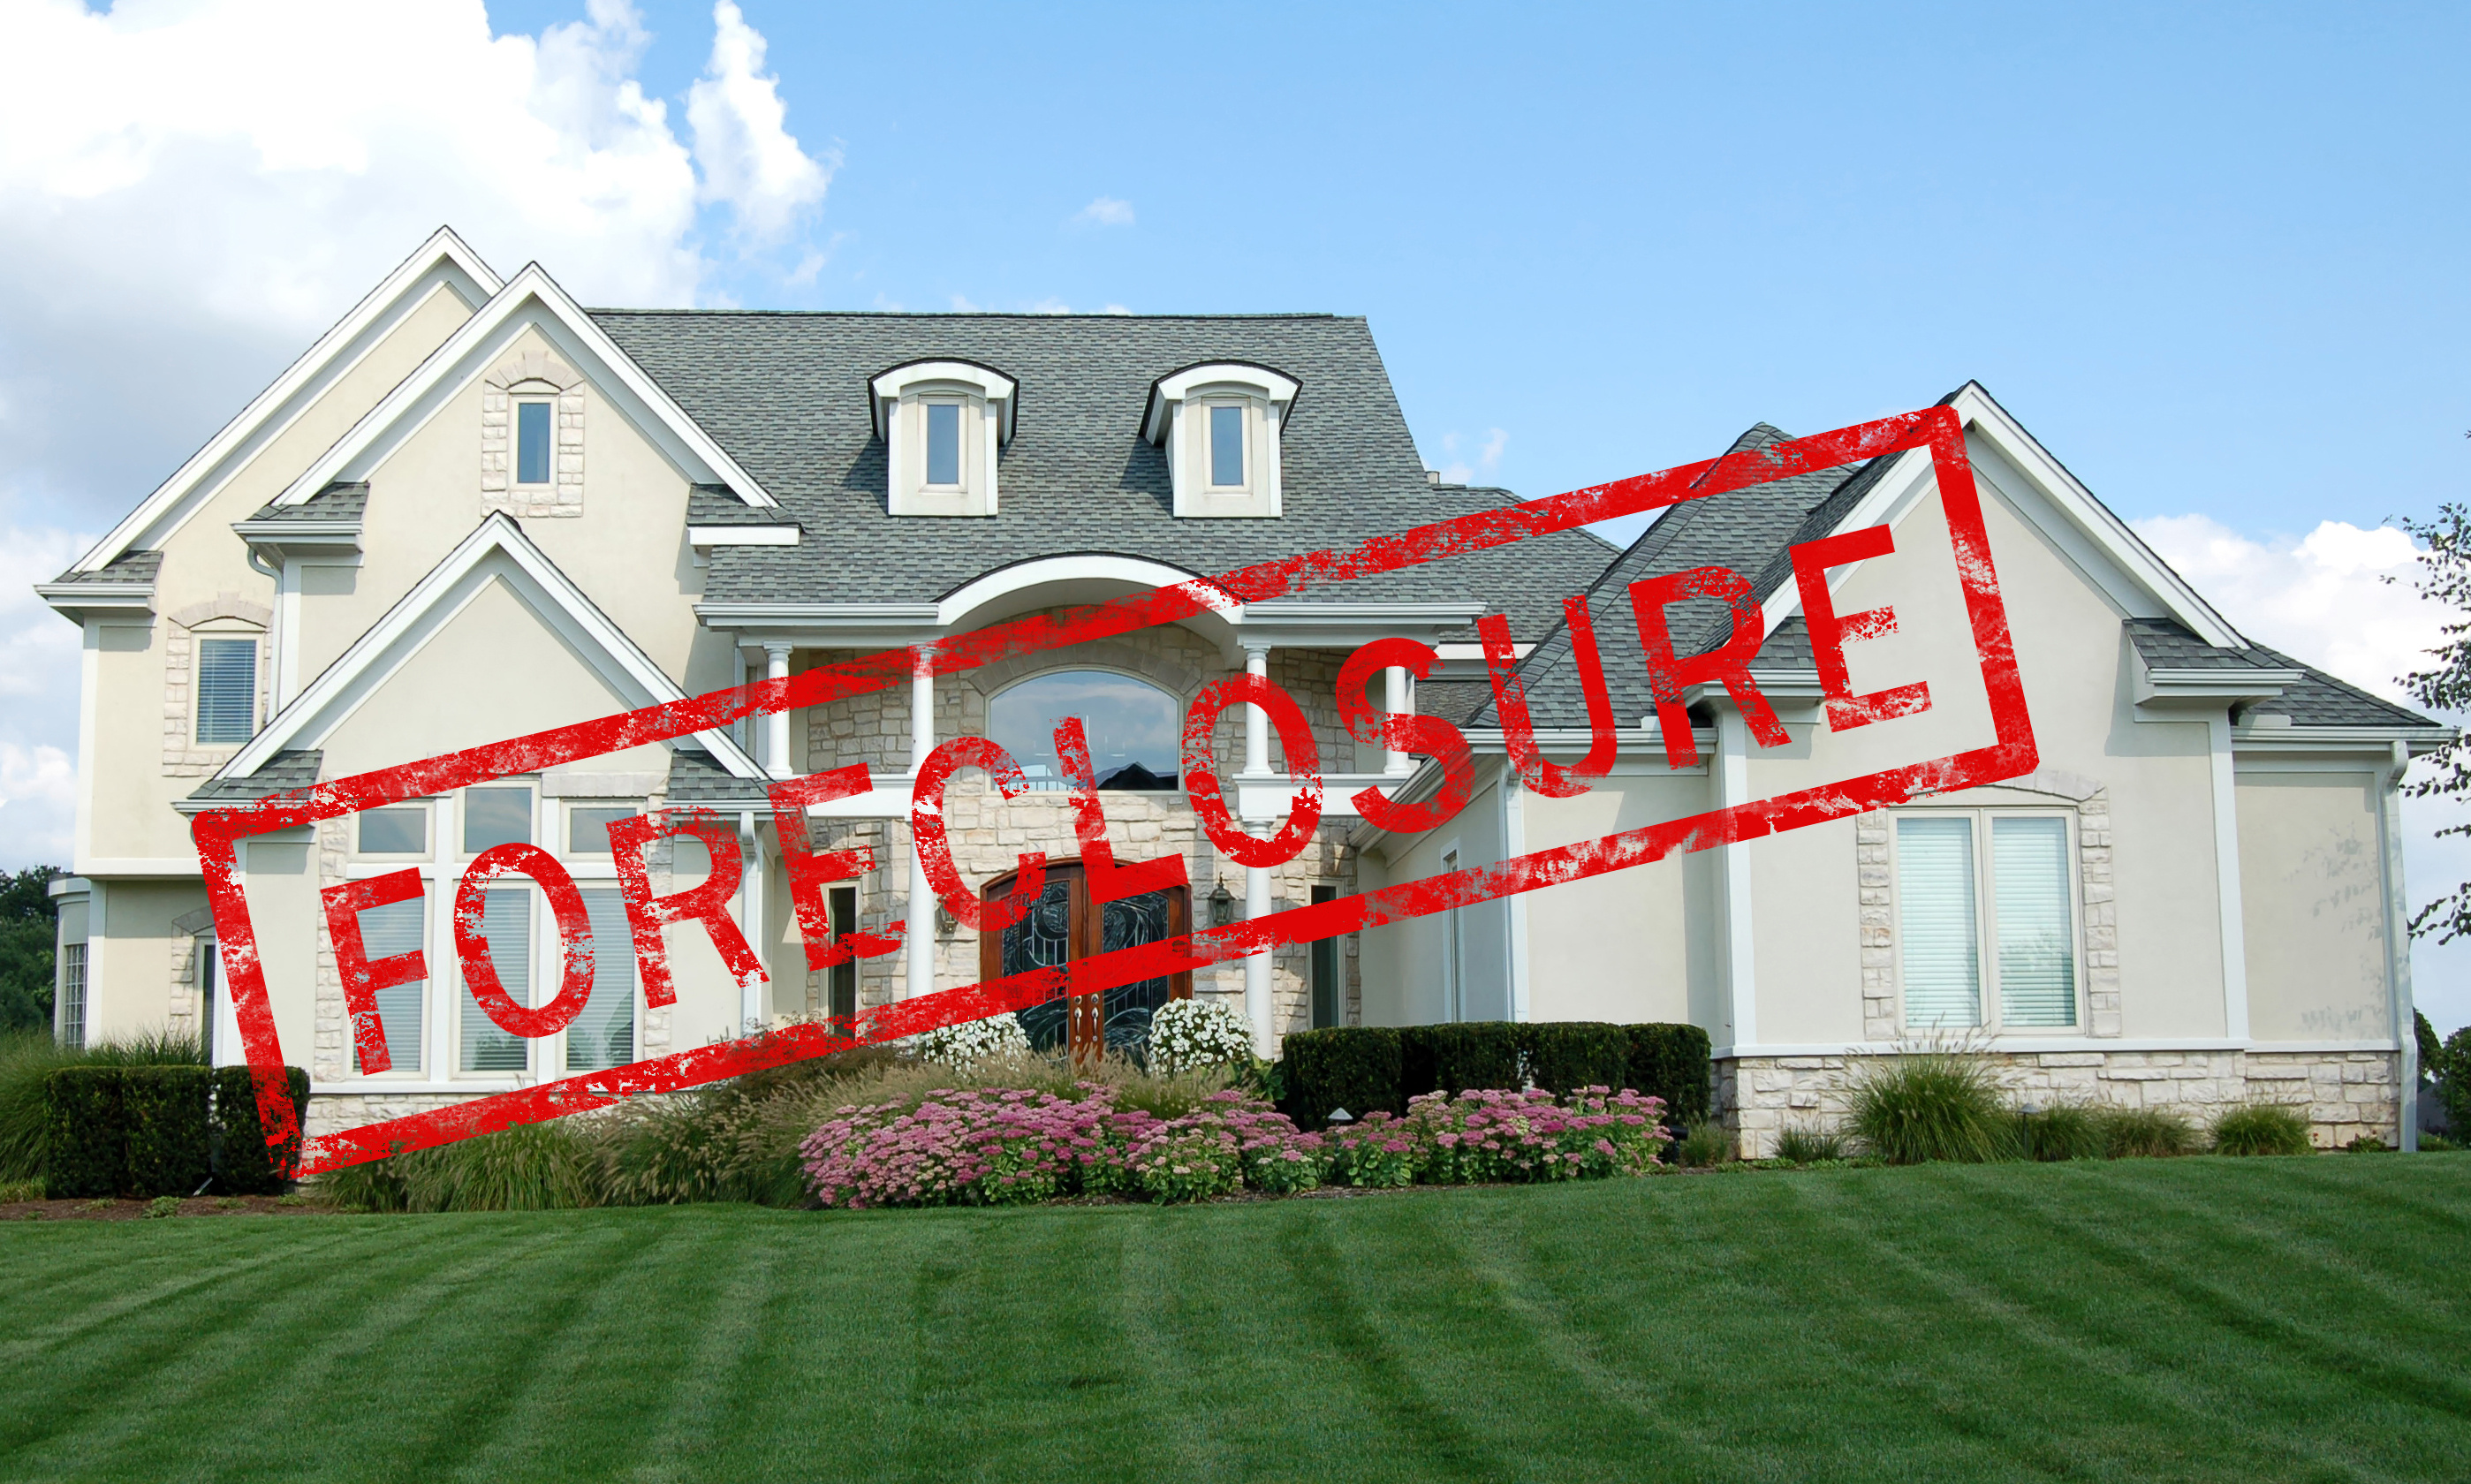 Call Real Estate Appraisal Services of WI, Inc. to discuss valuations on Green Lake foreclosures